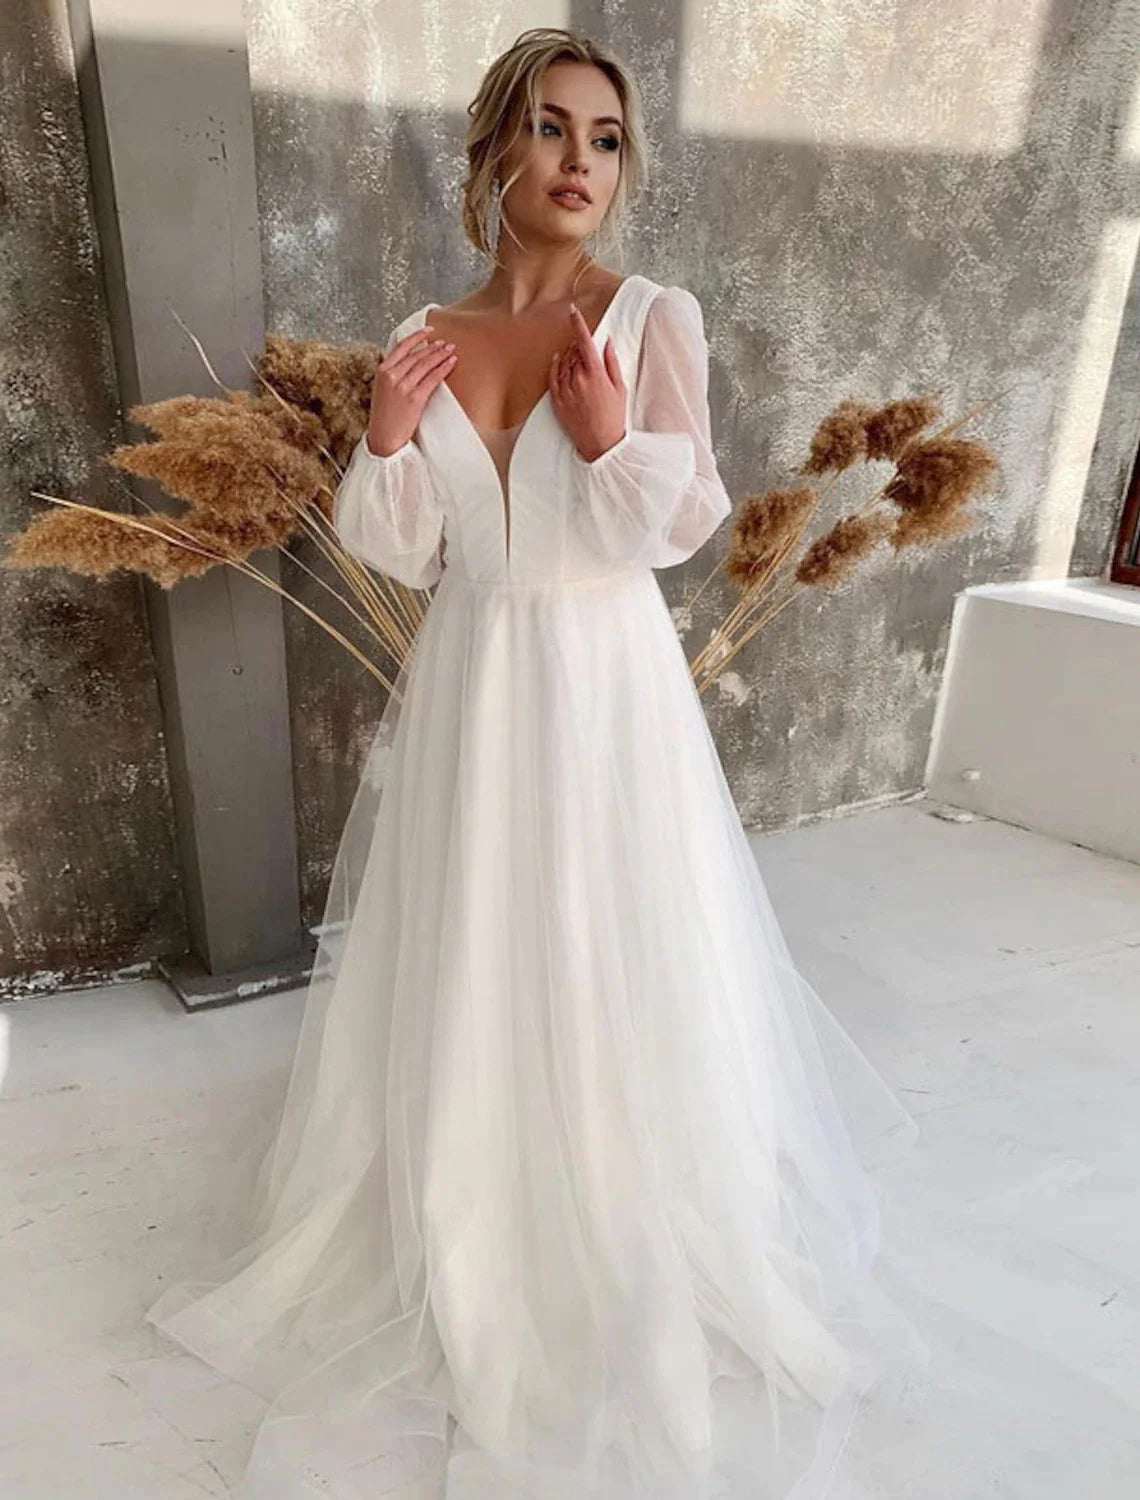 Reception Casual Wedding Dresses A-Line V Neck Long Sleeve Floor Length Tulle Bridal Gowns With Solid Color